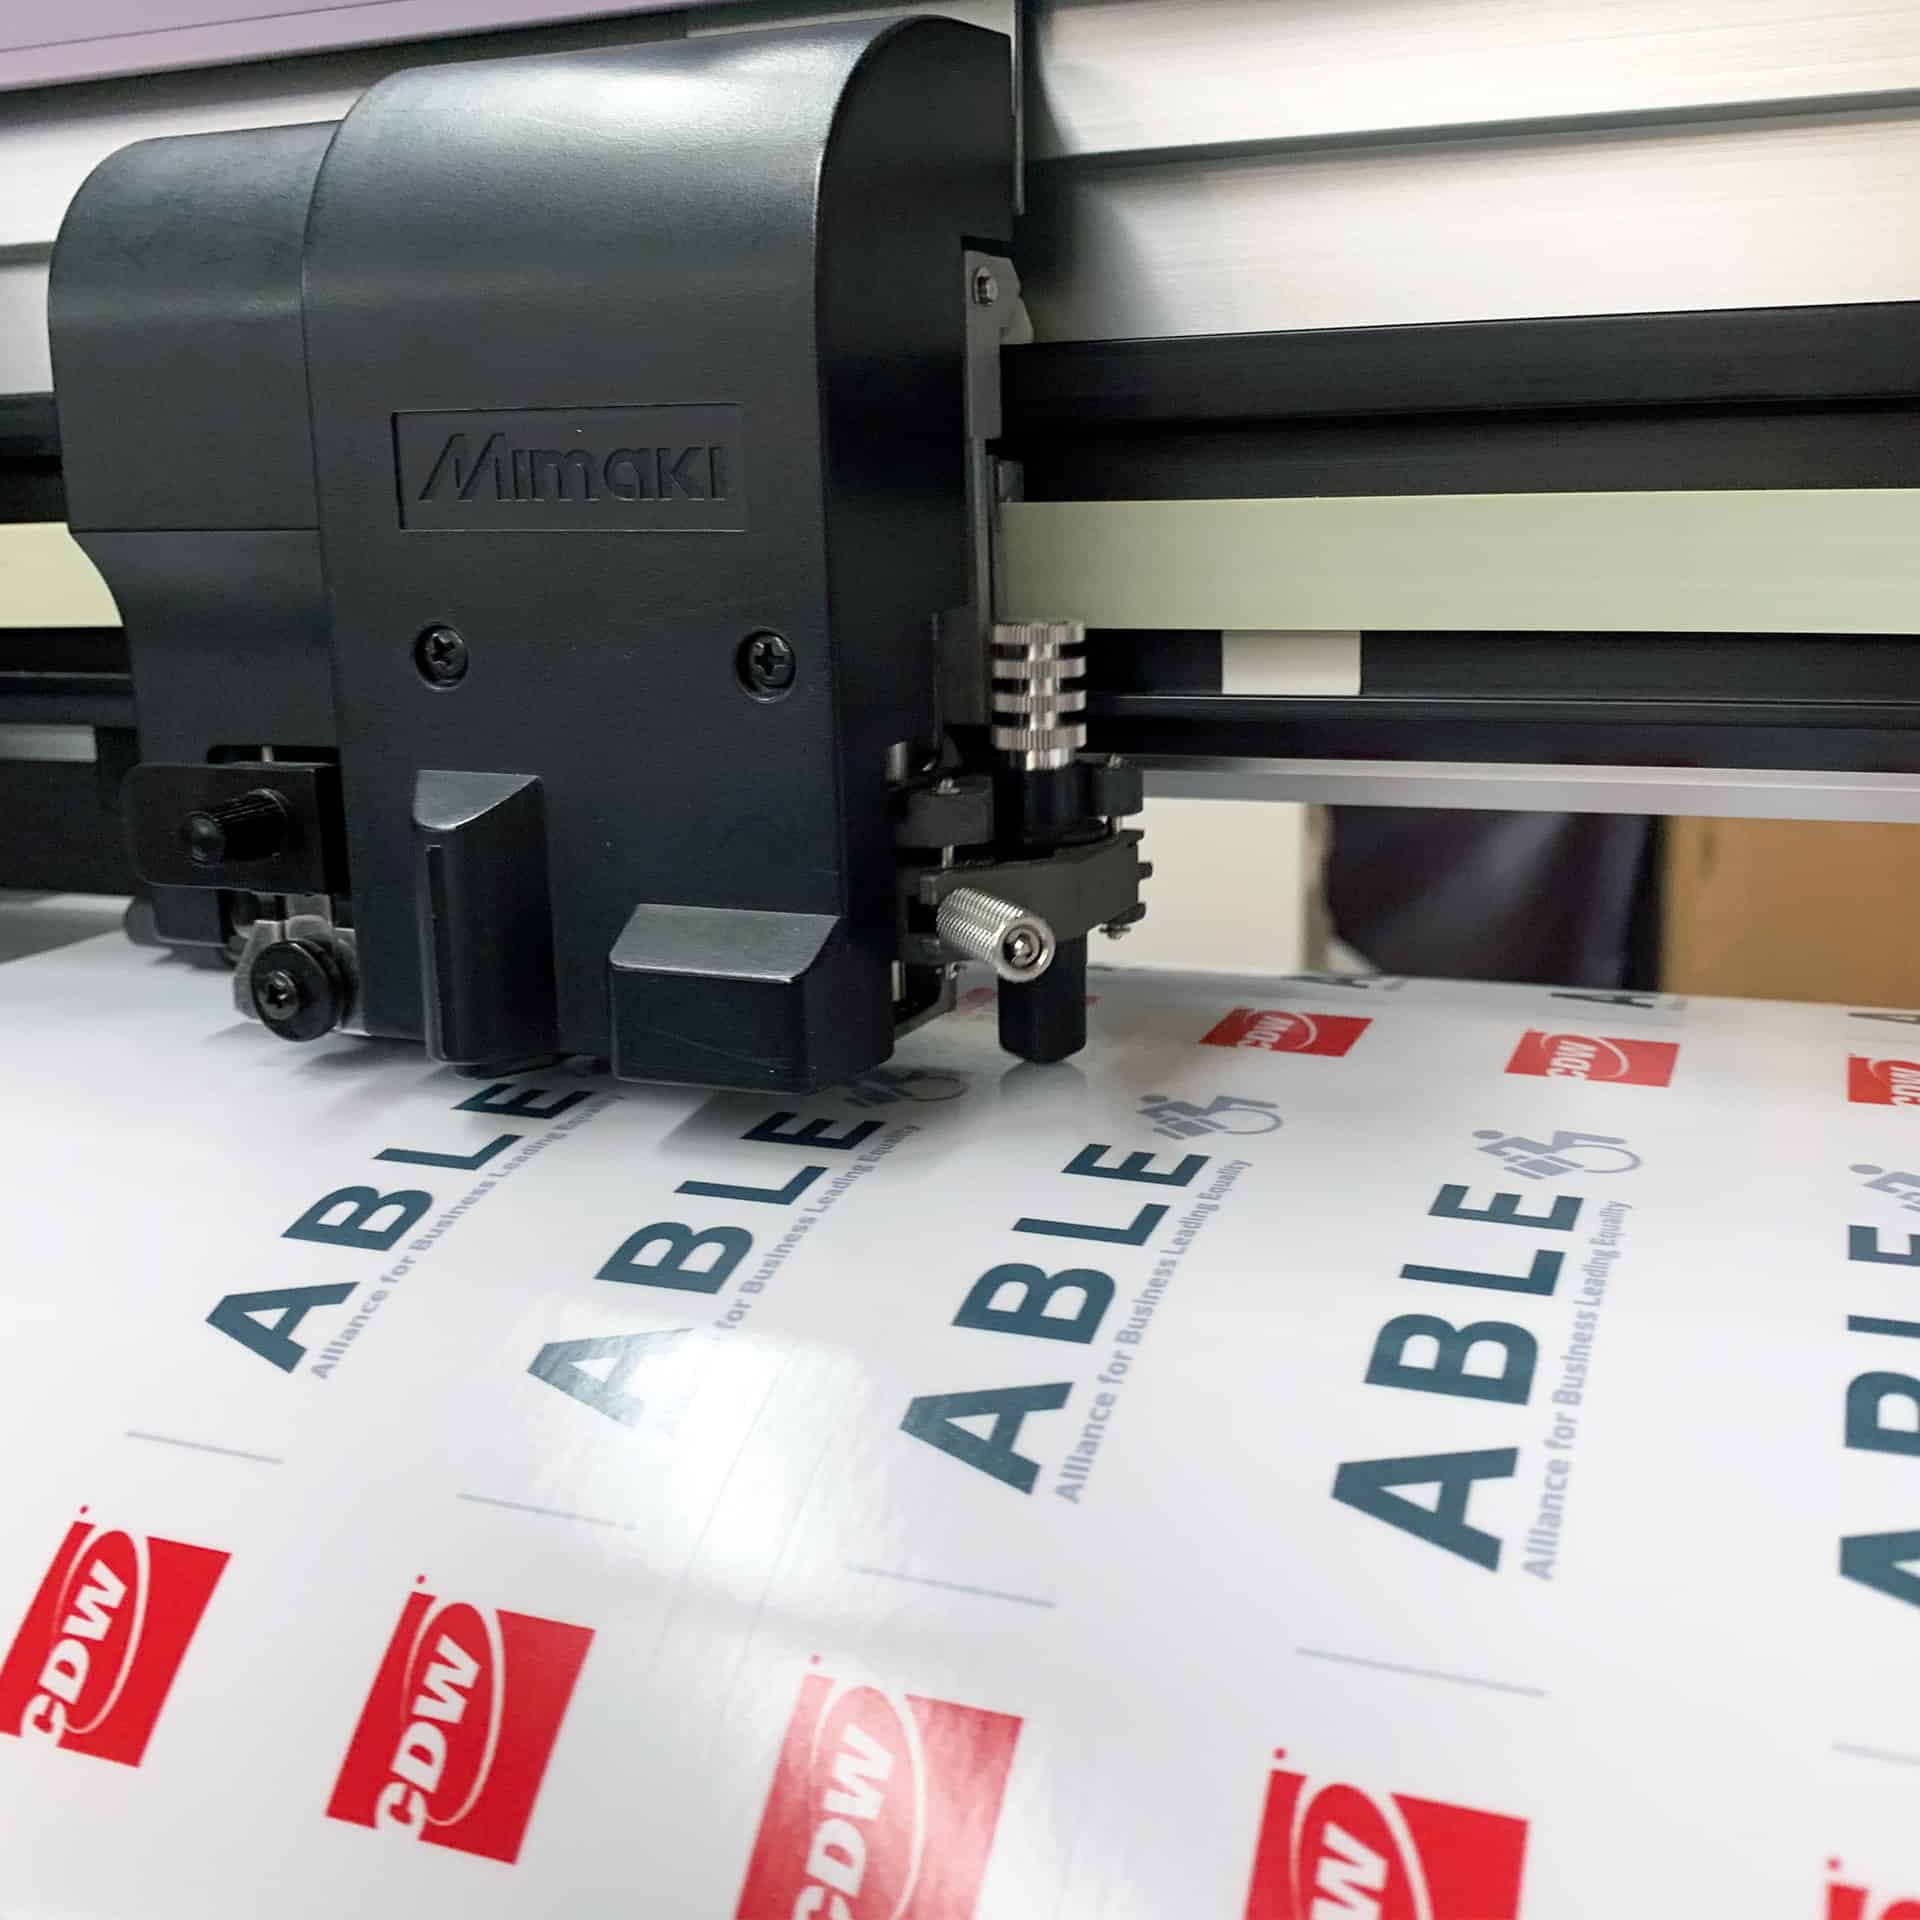 A commercial machine is printing a label on a sheet of paper.